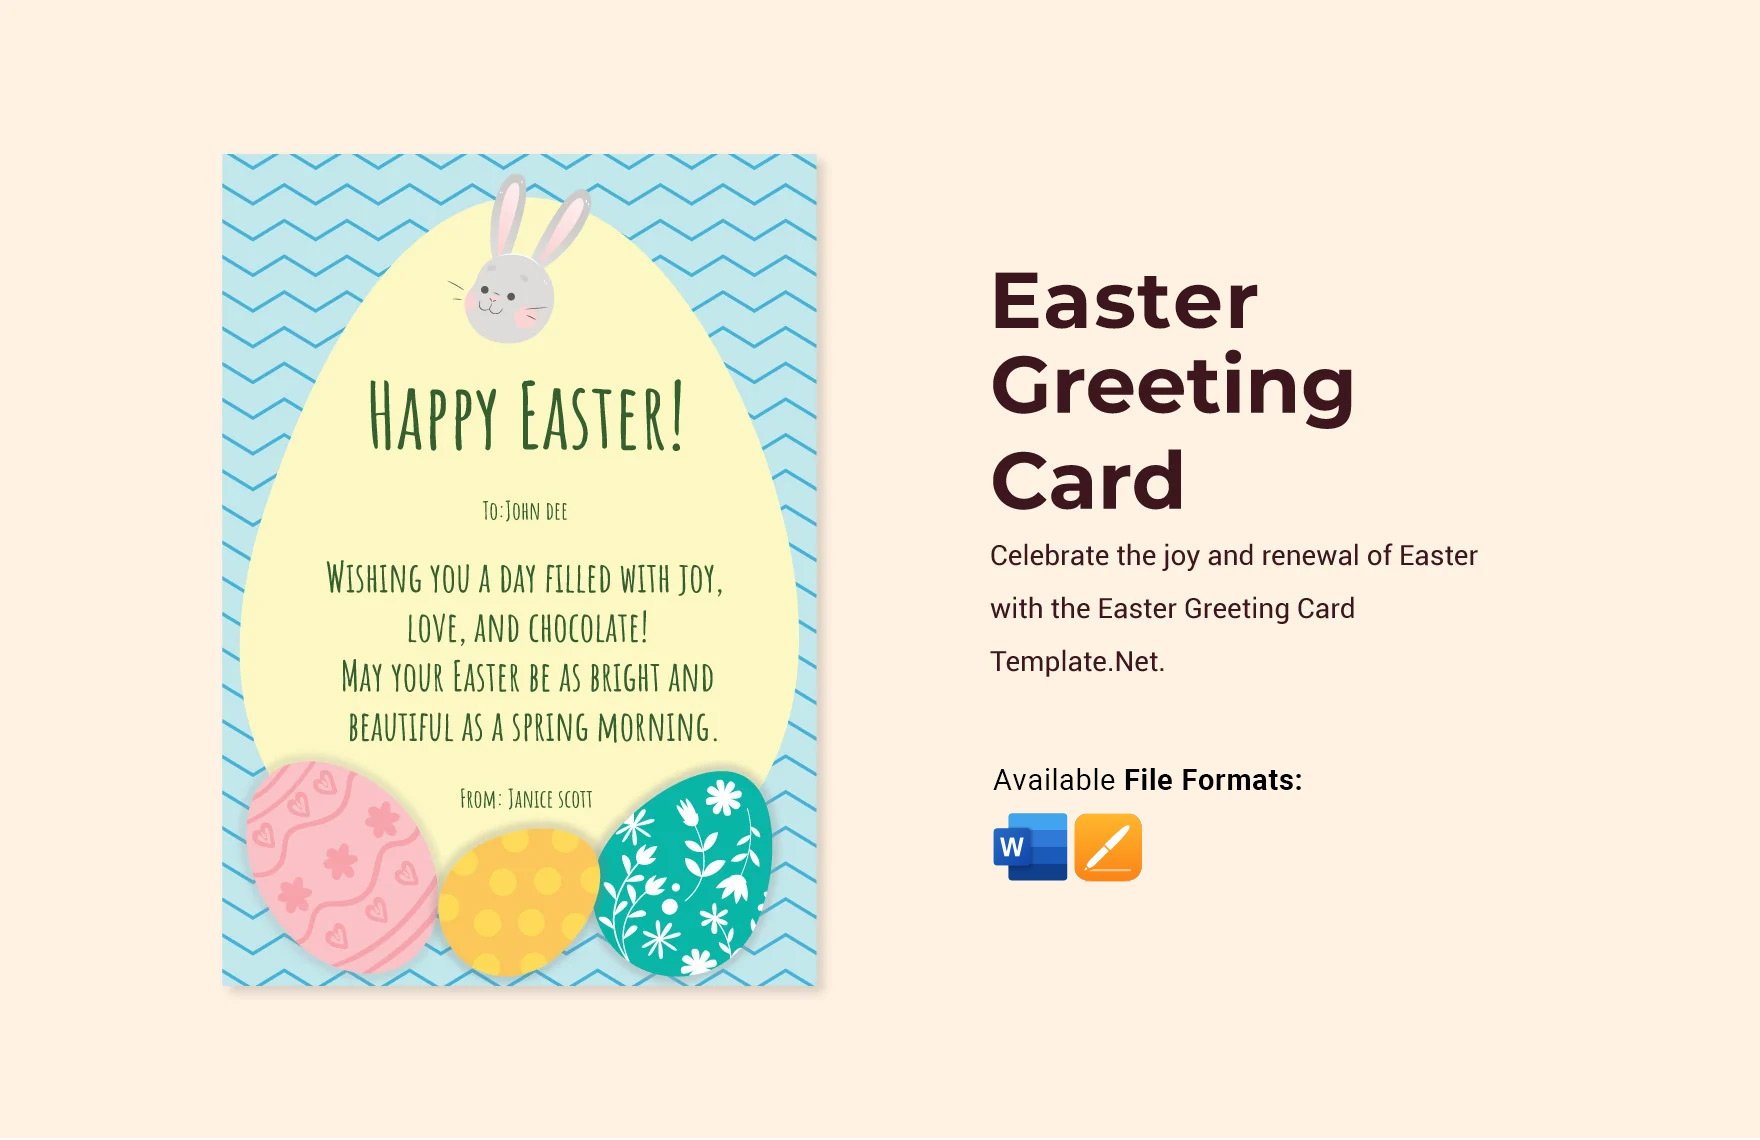 Free Easter Greeting Card Template in Word, Apple Pages